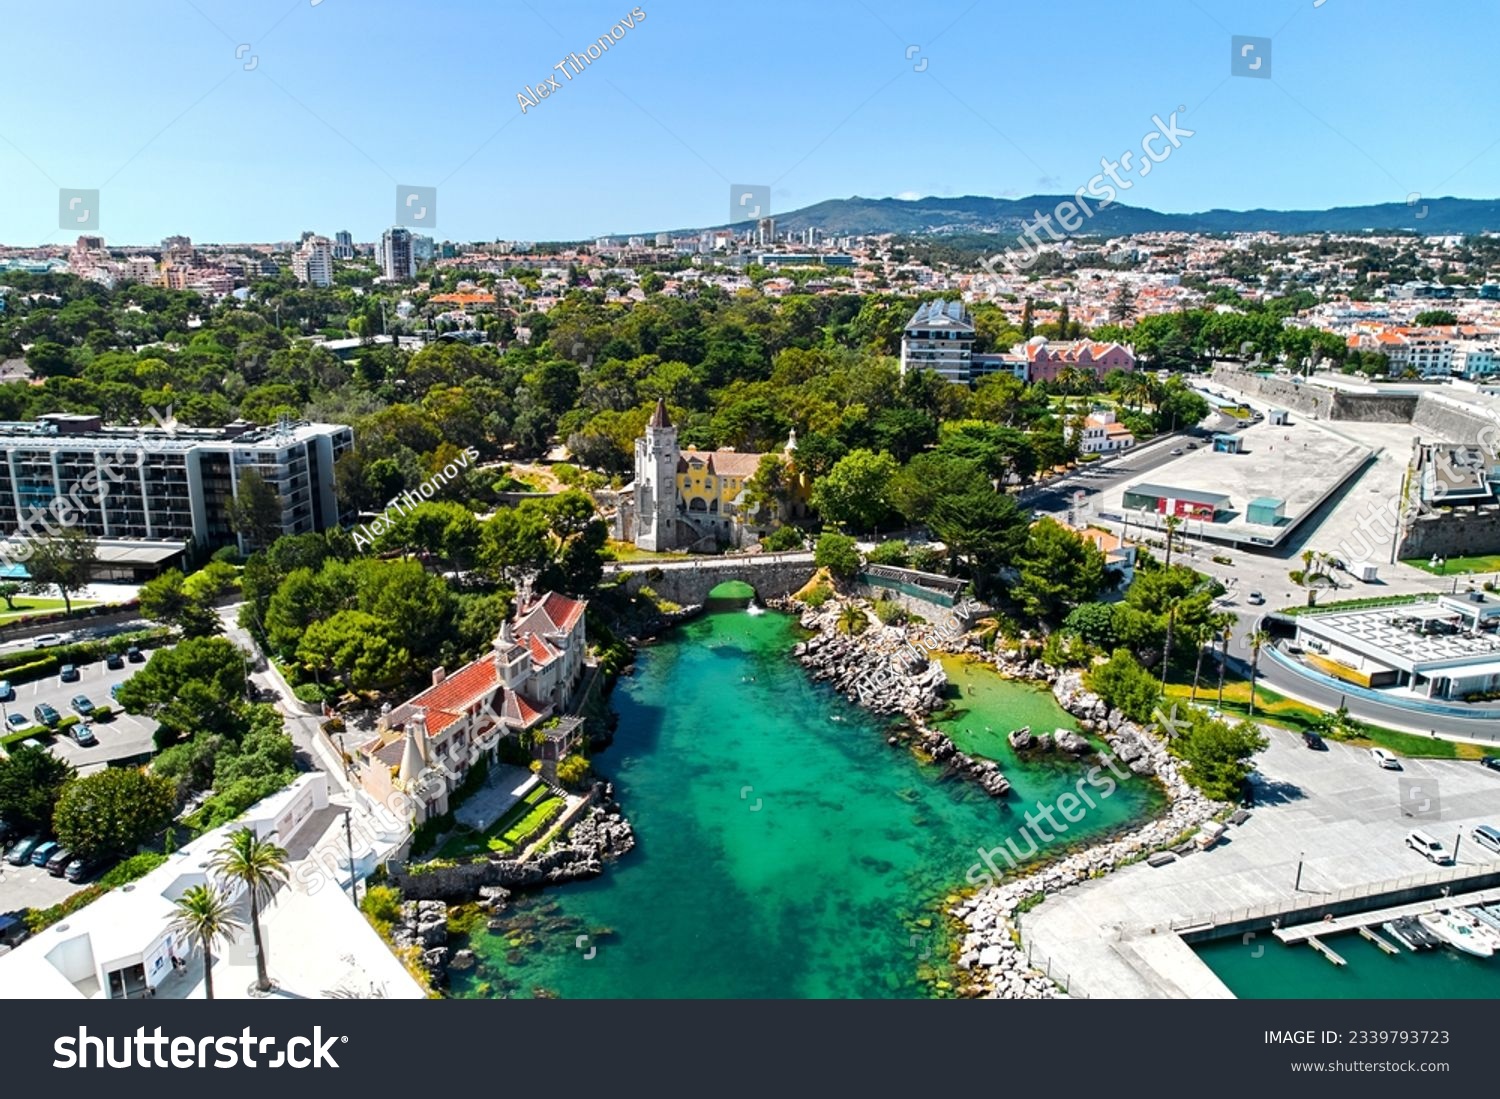 Cascais coastal resort town in Lisbon at sunny summer day, drone point of view of townscape. Turquoise waters of the Atlantic Ocean, rocky coastline. Travel, tourism concept. Portugal #2339793723